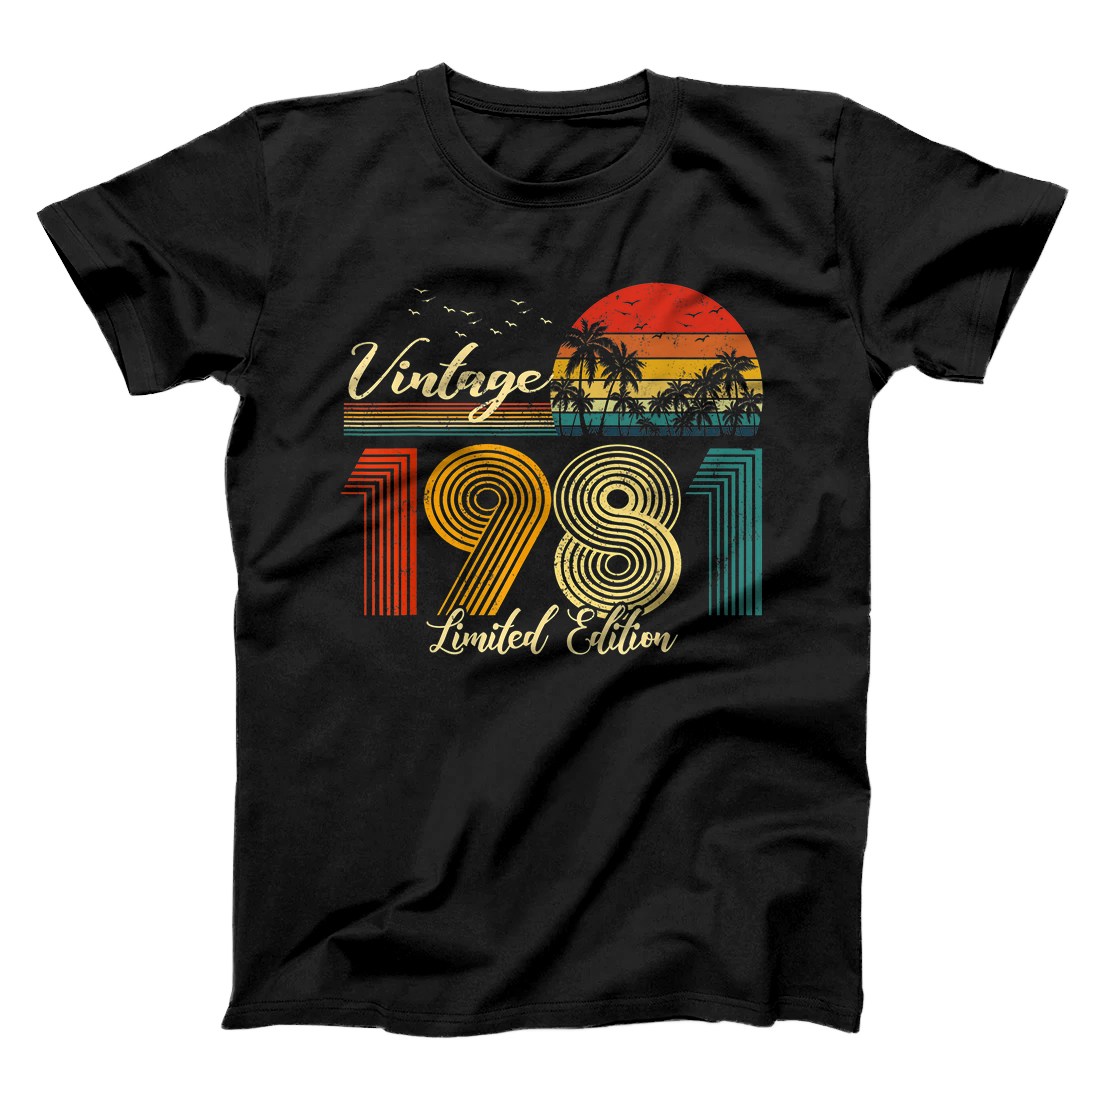 Personalized Vintage 1981 T-Shirt Limited Edition Men Women - 39 Birthday T-Shirt